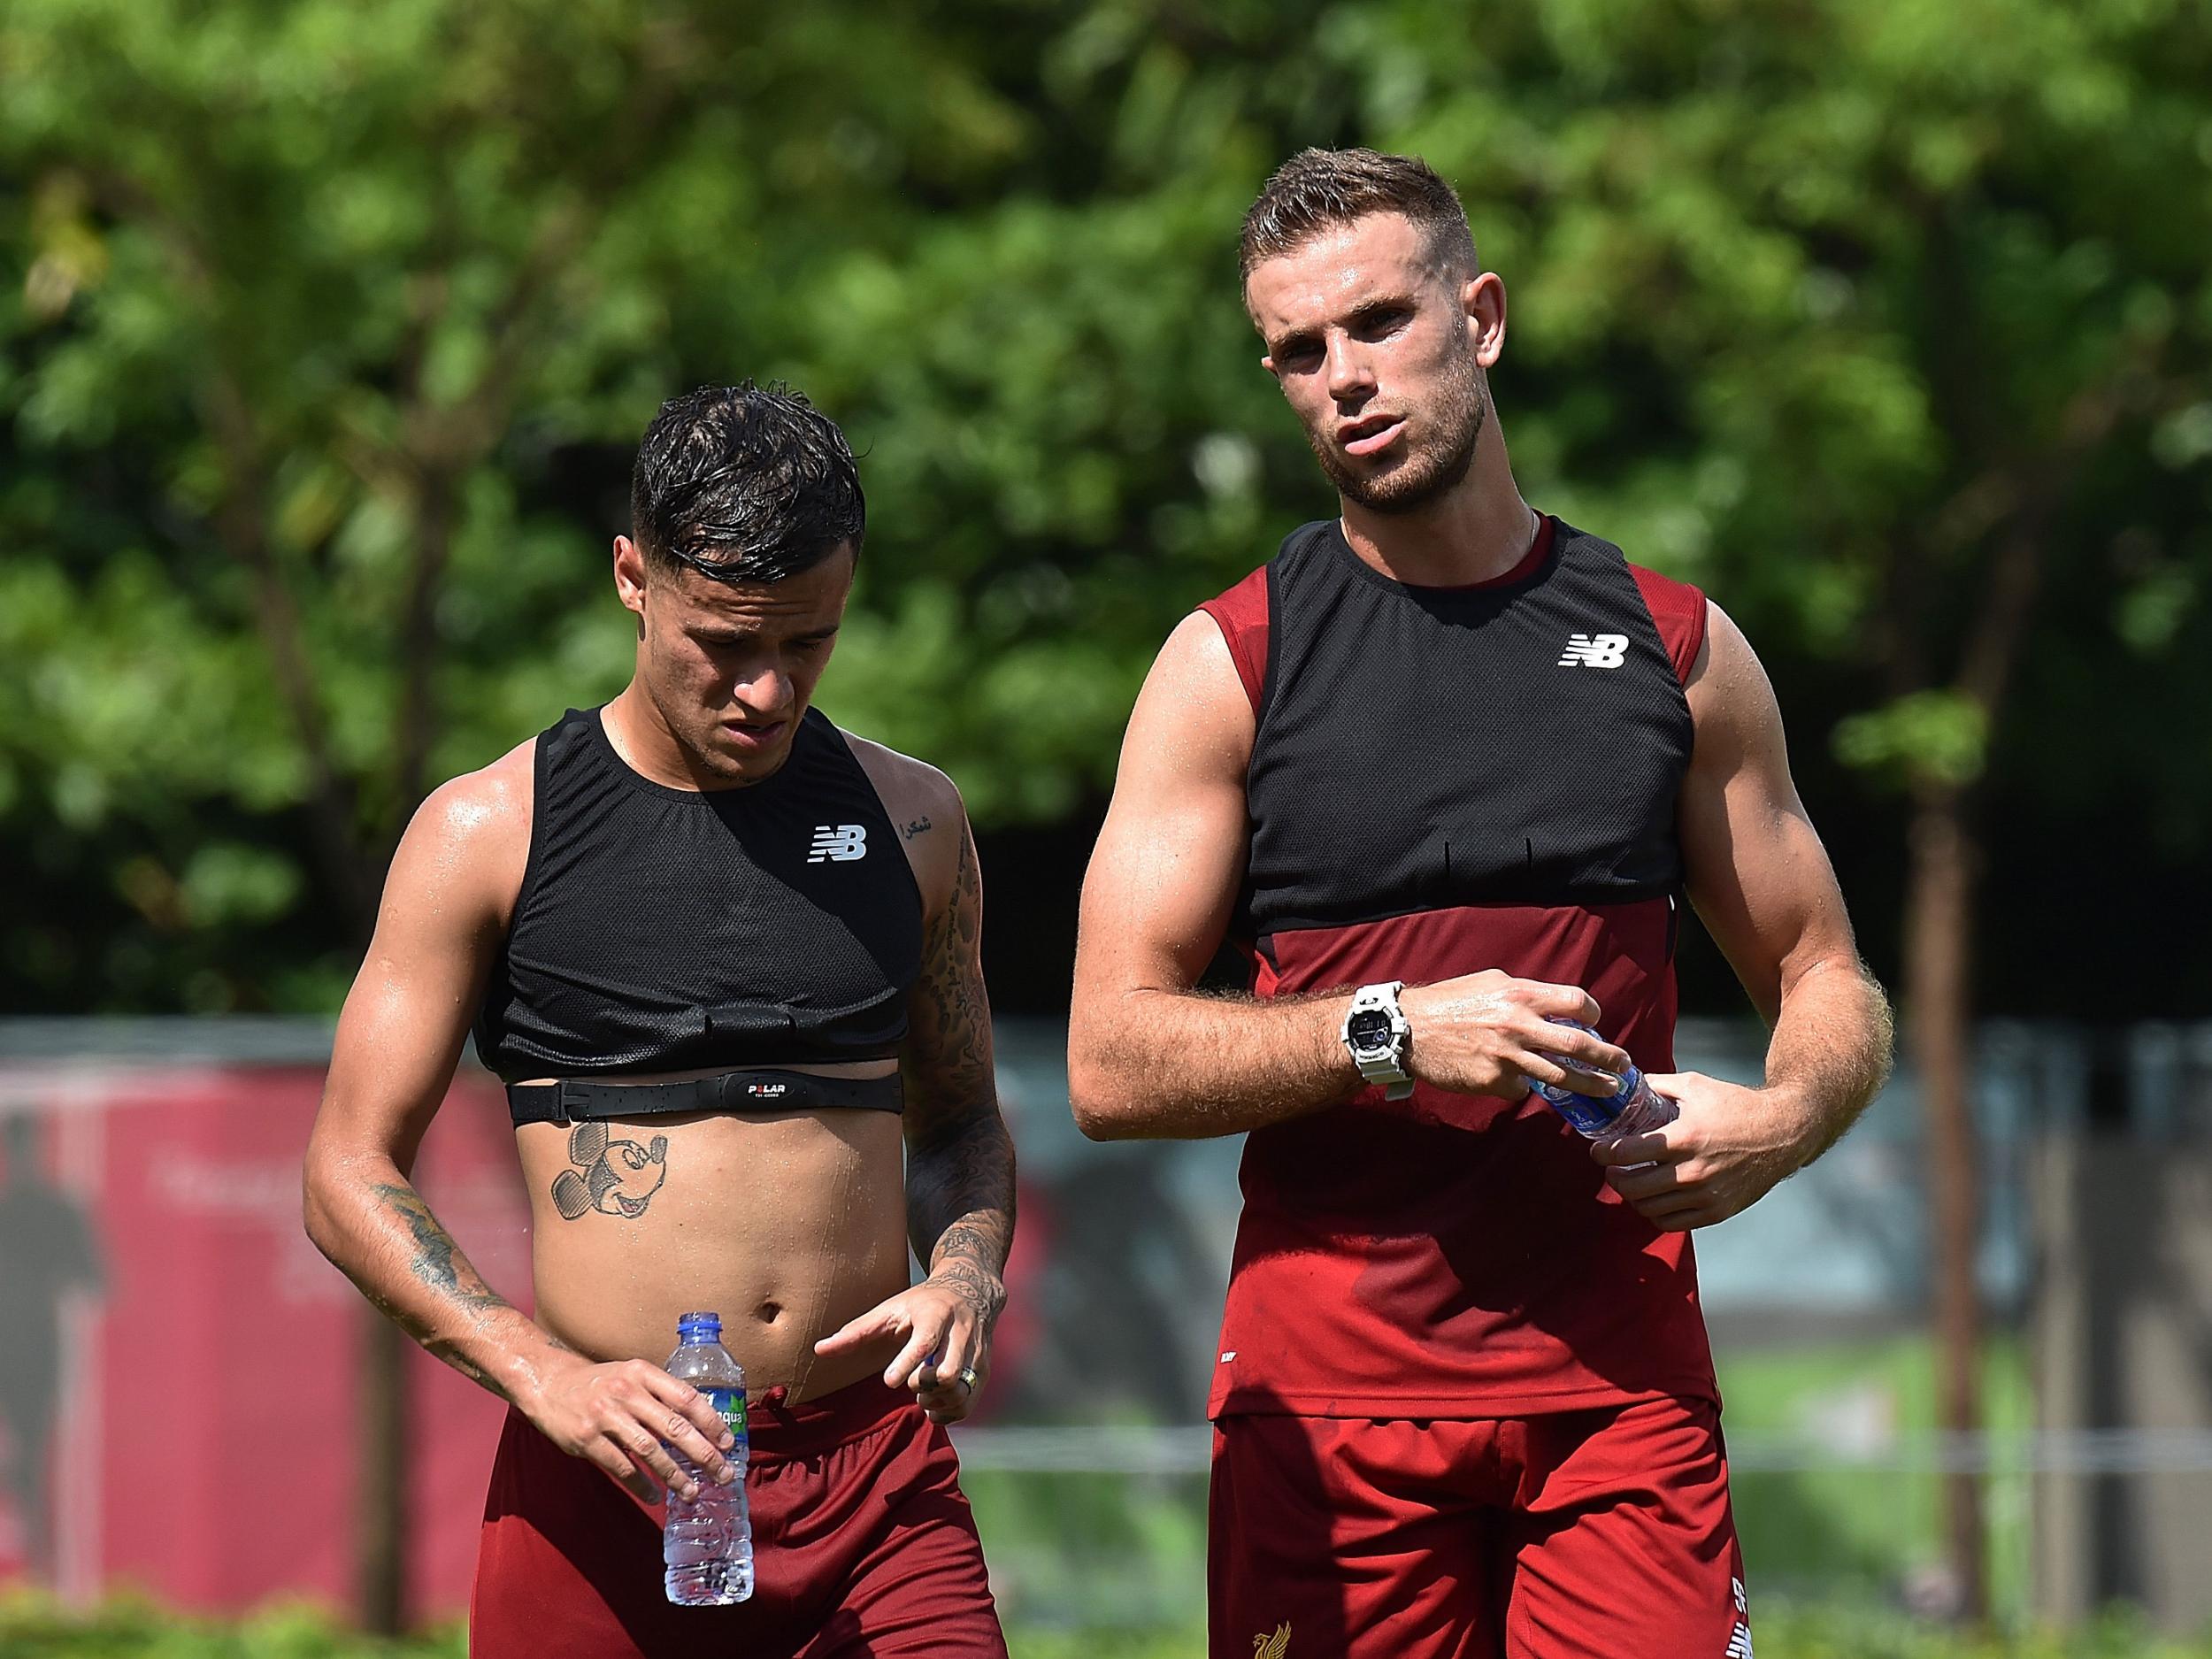 Jordan Henderson believes he can have little influence on Philippe Coutinho's future